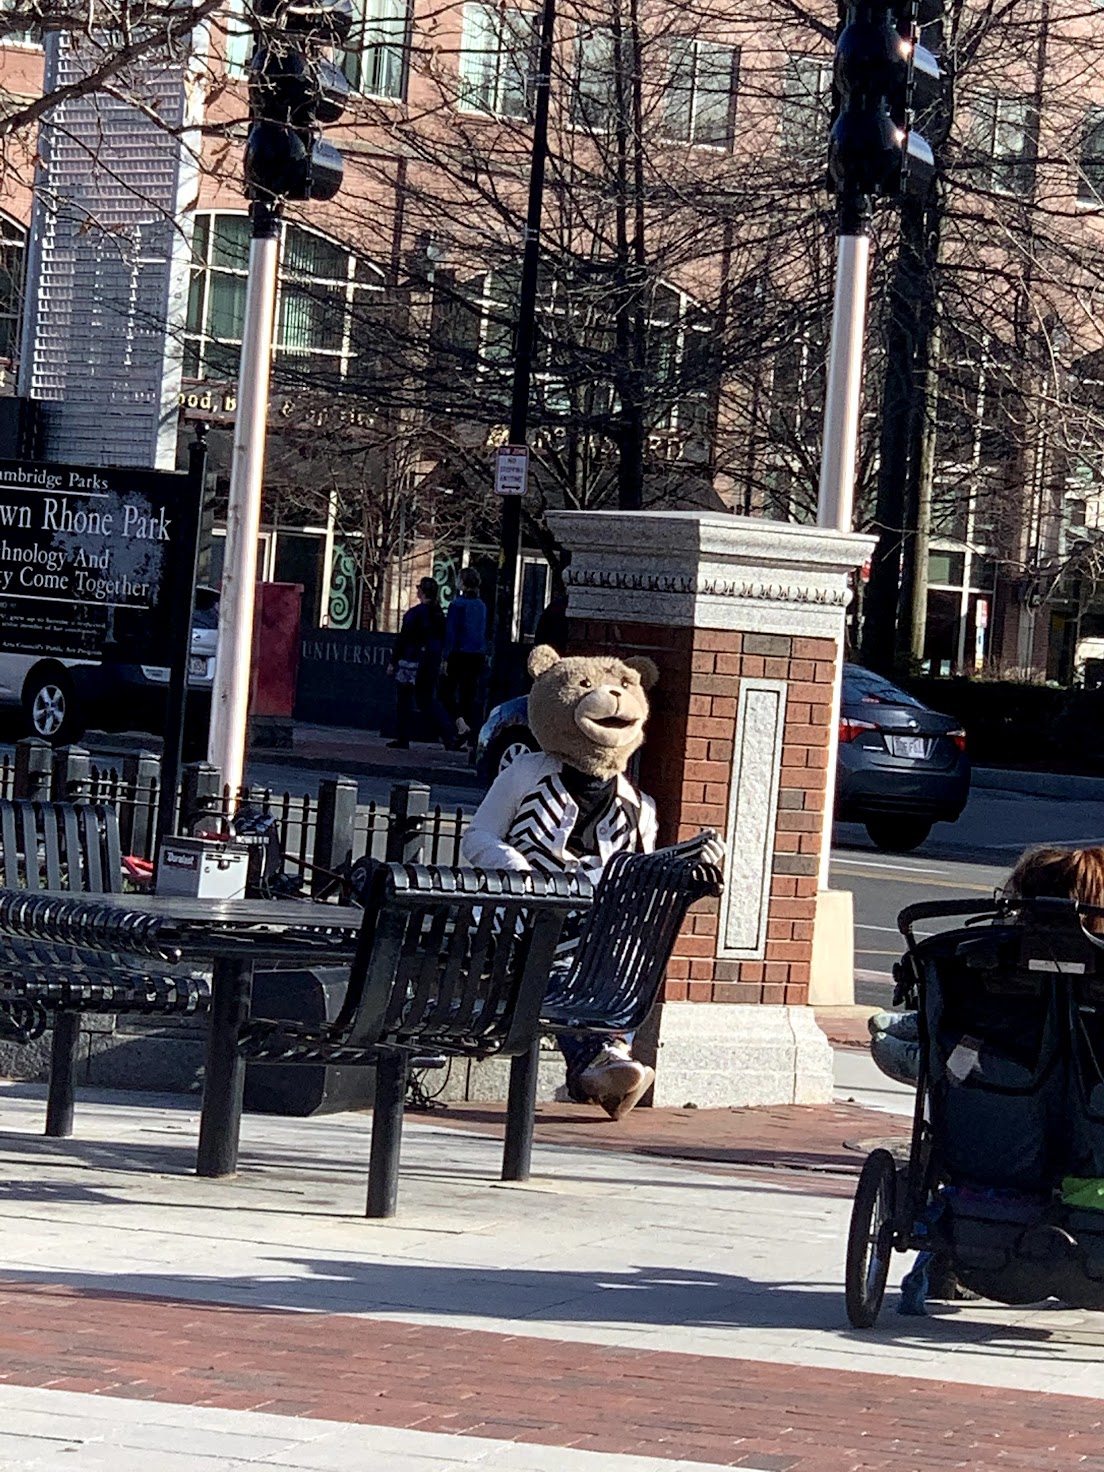 A person in a bear costume and a spiffy outfit takes a break from jamming on the guitar.